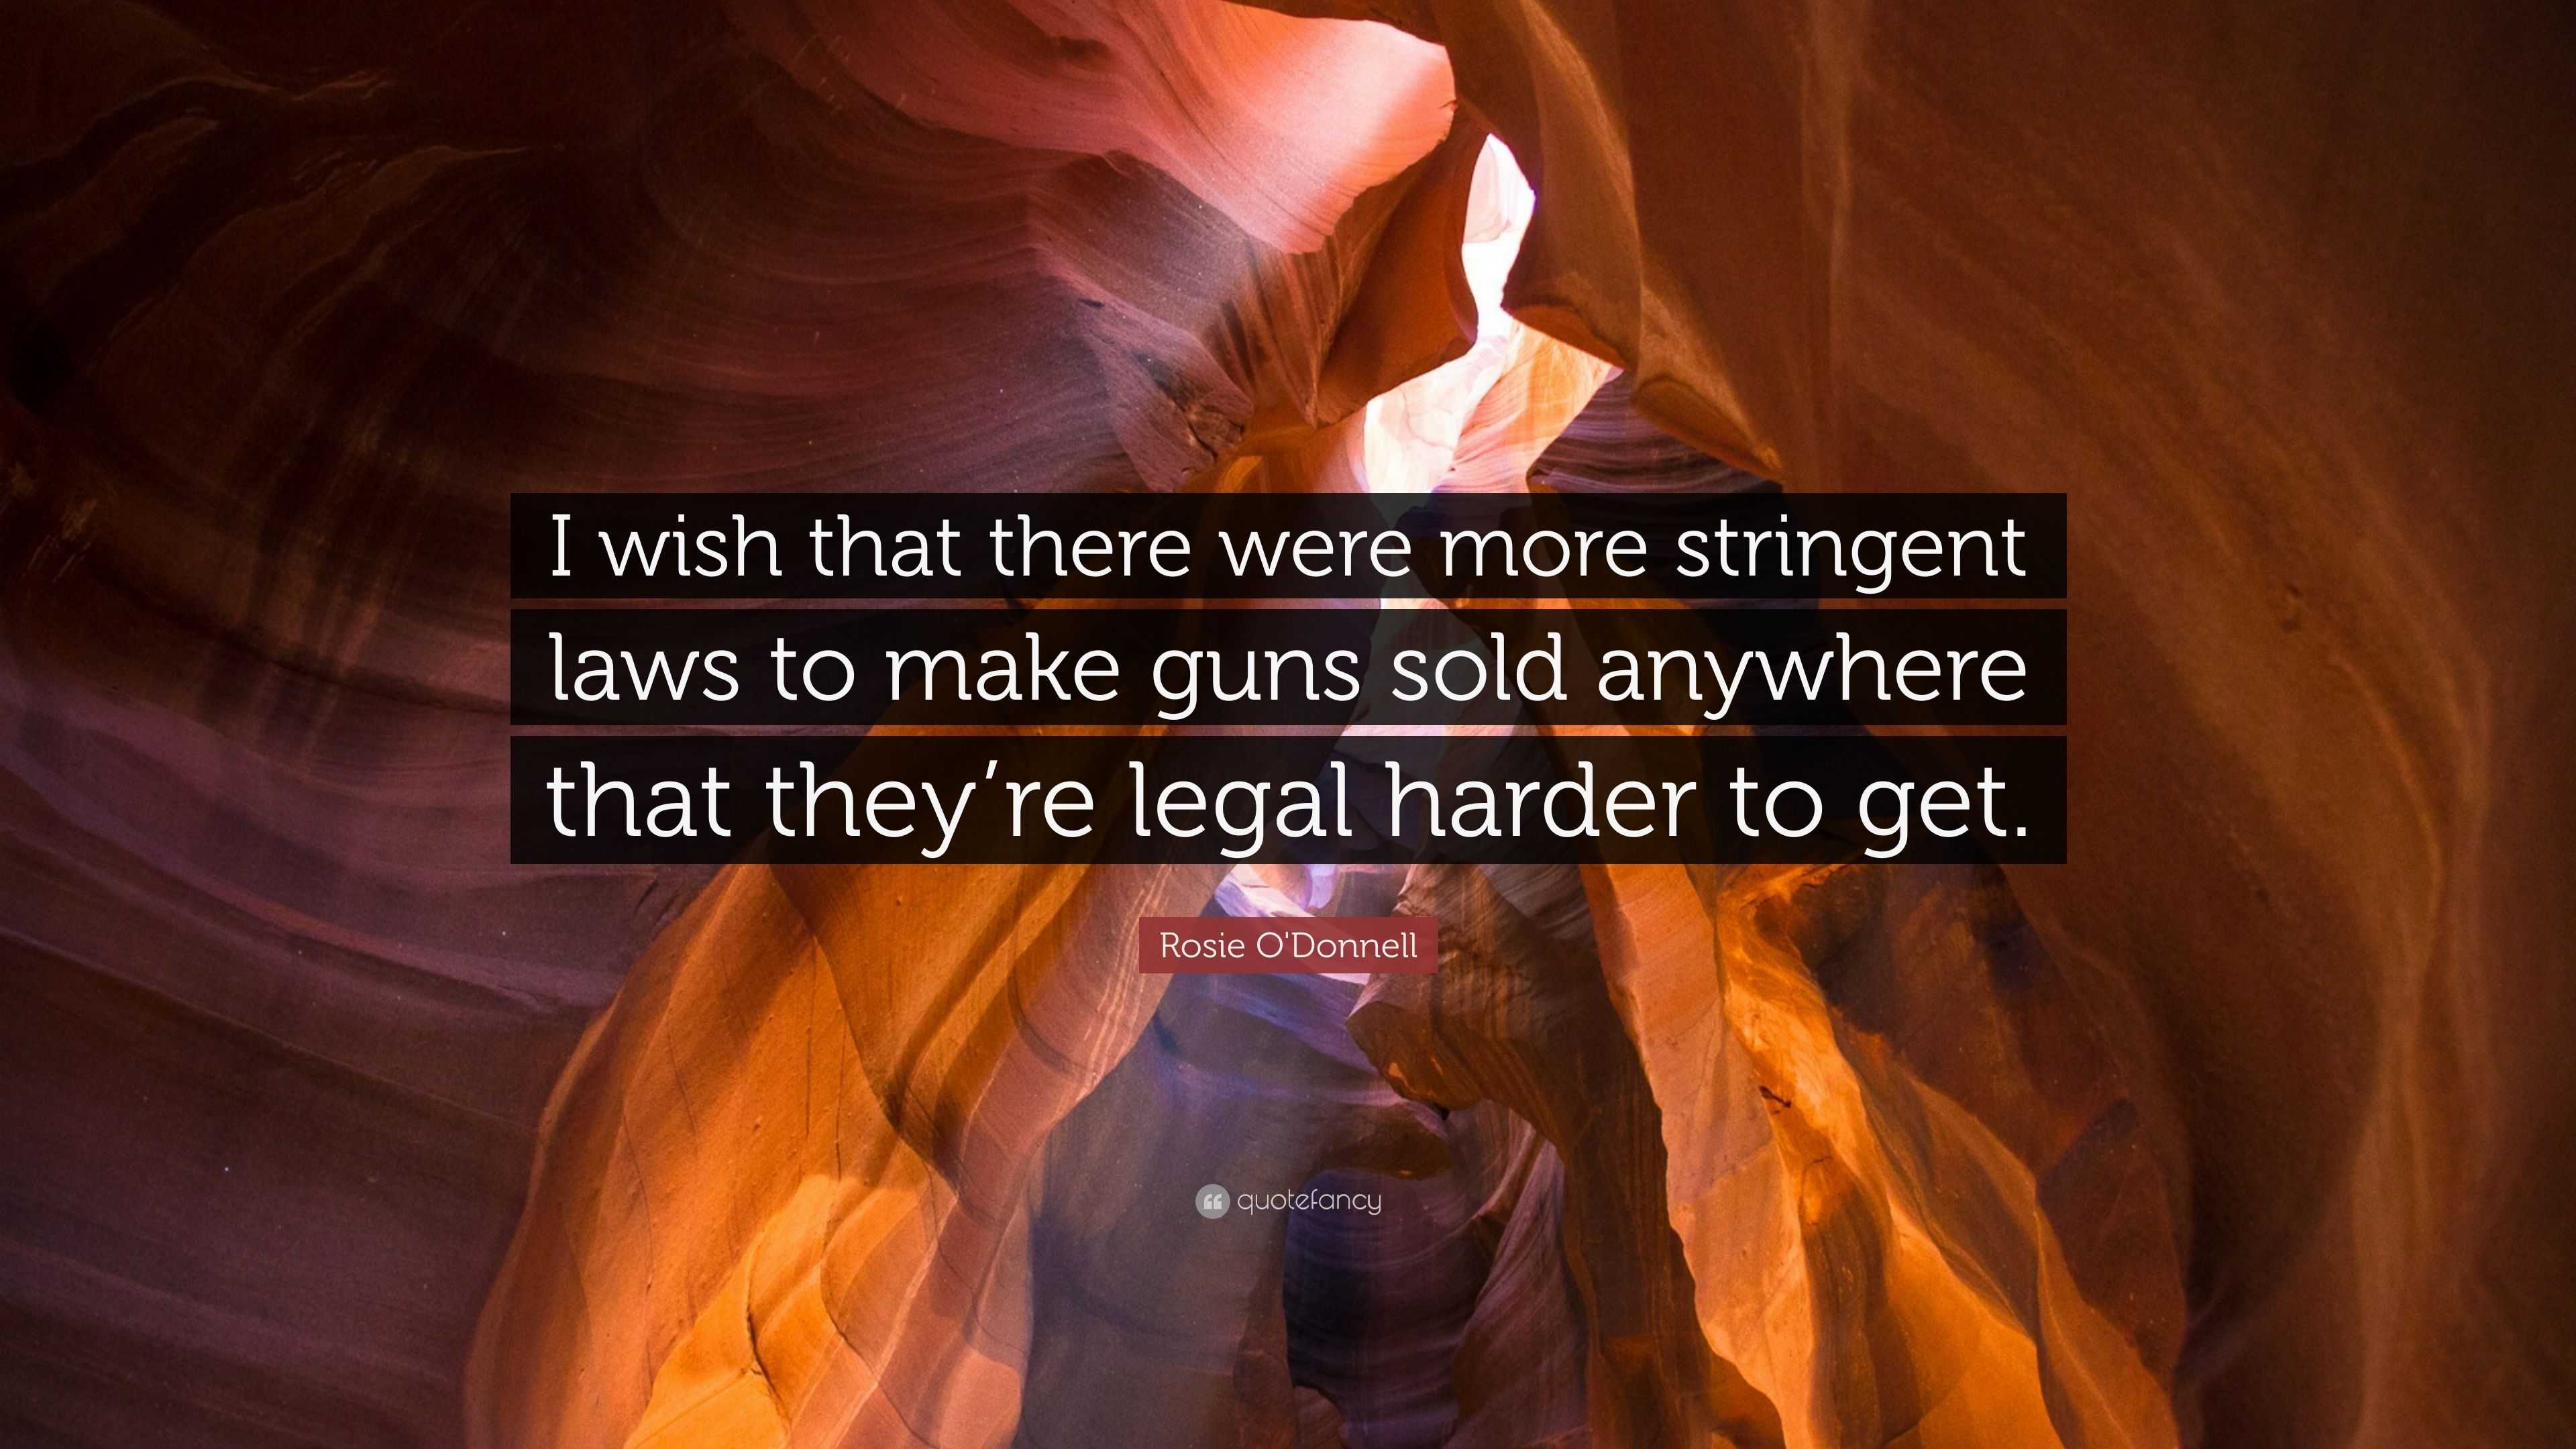 Rosie O'Donnell Quote: “I wish that there were more stringent laws to make  guns sold